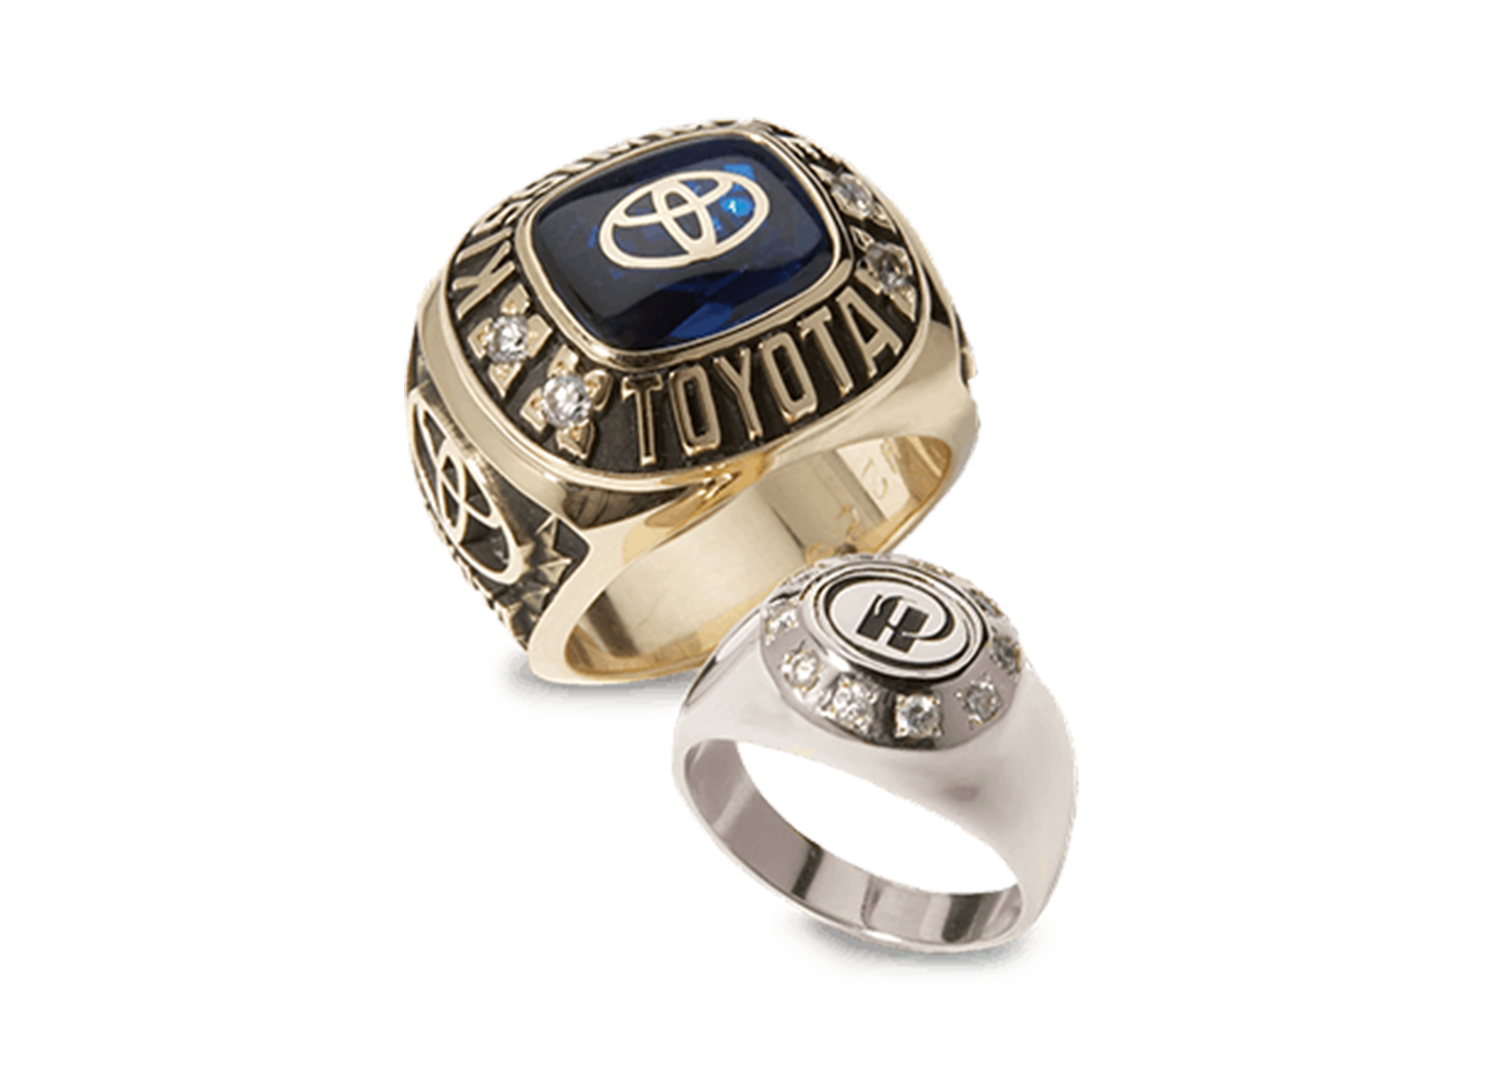 14 kt yellow gold signet ring with an Audi logo. - Ring size: 20.25 mm -  Catawiki